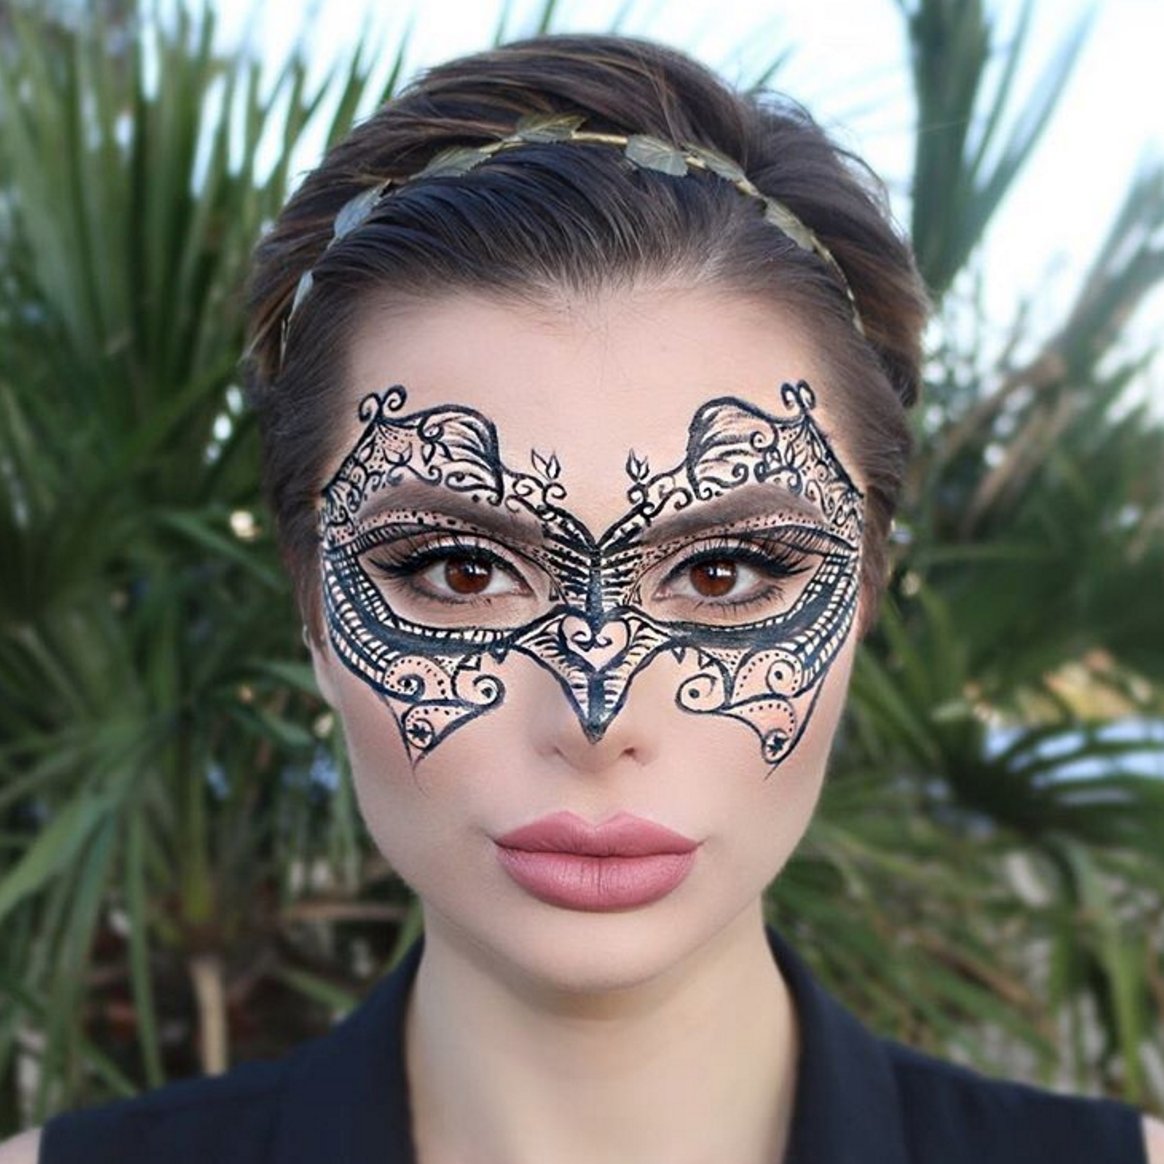 10 Fashionable Face Makeup Ideas For Halloween 5 easy halloween makeup ideas you can do with only eyeliner glamour 2022